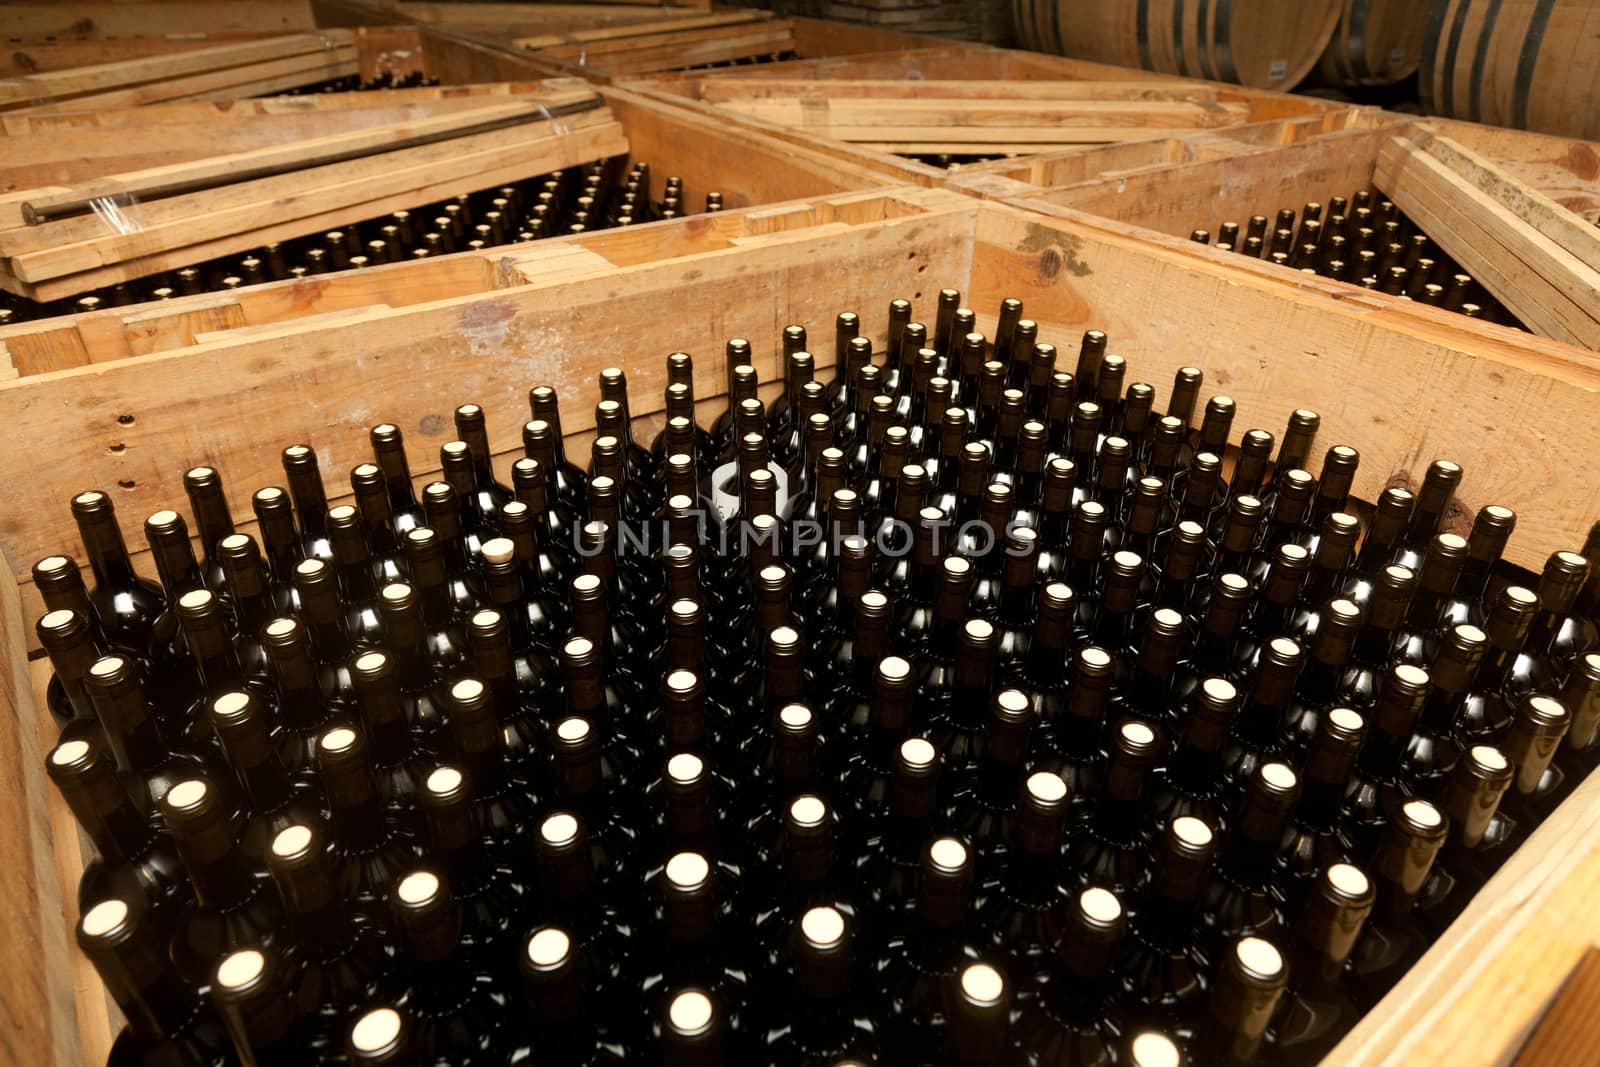 Packing bottles with wine by Portokalis